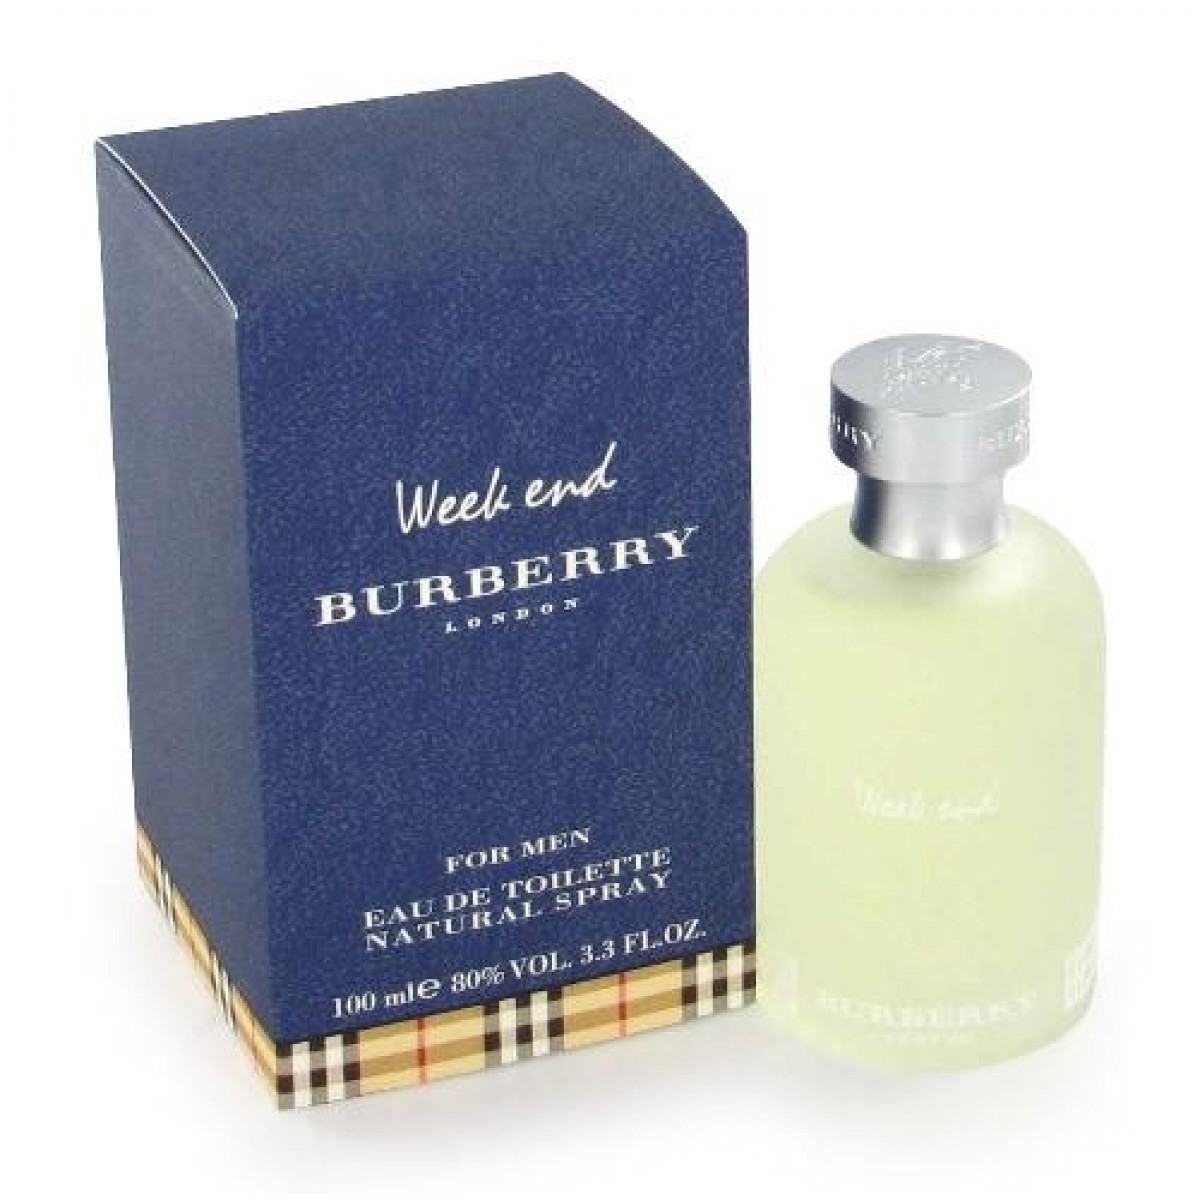 Burberry Burberry Weekend EDT Perfume For Men   $24.44（46%off）